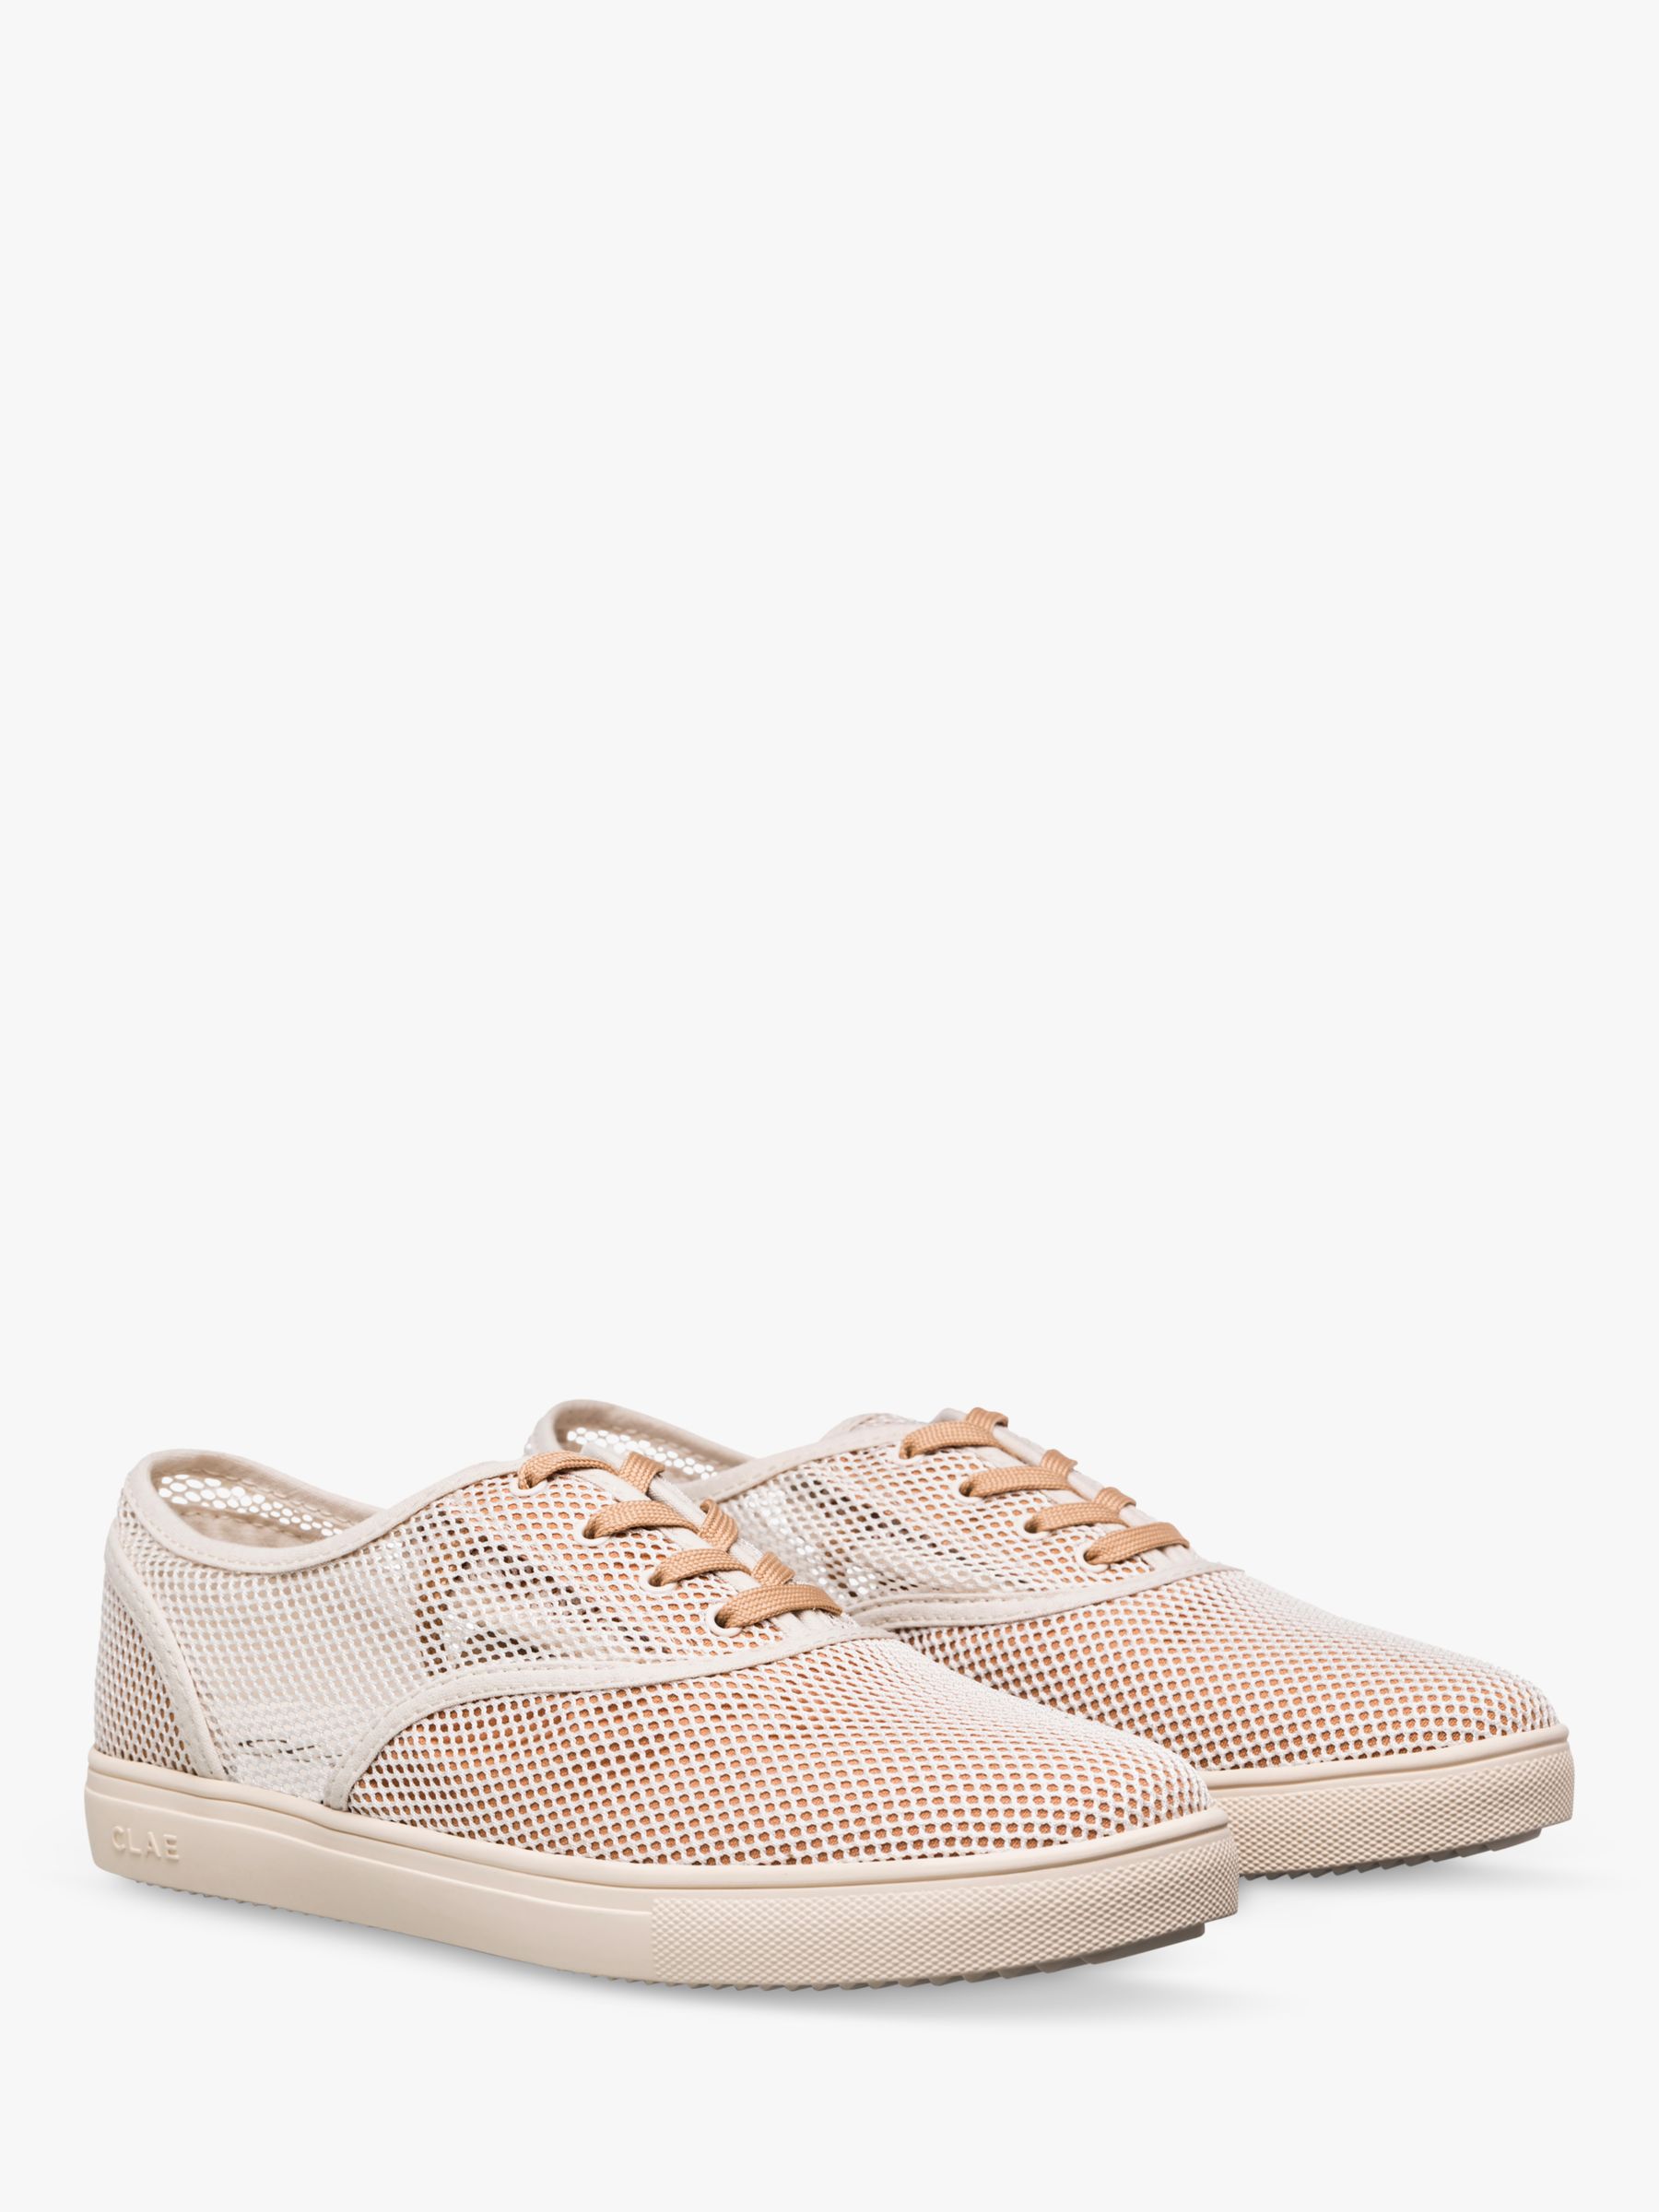 Buy CLAE Bruce Knit Trainers, Off White Online at johnlewis.com